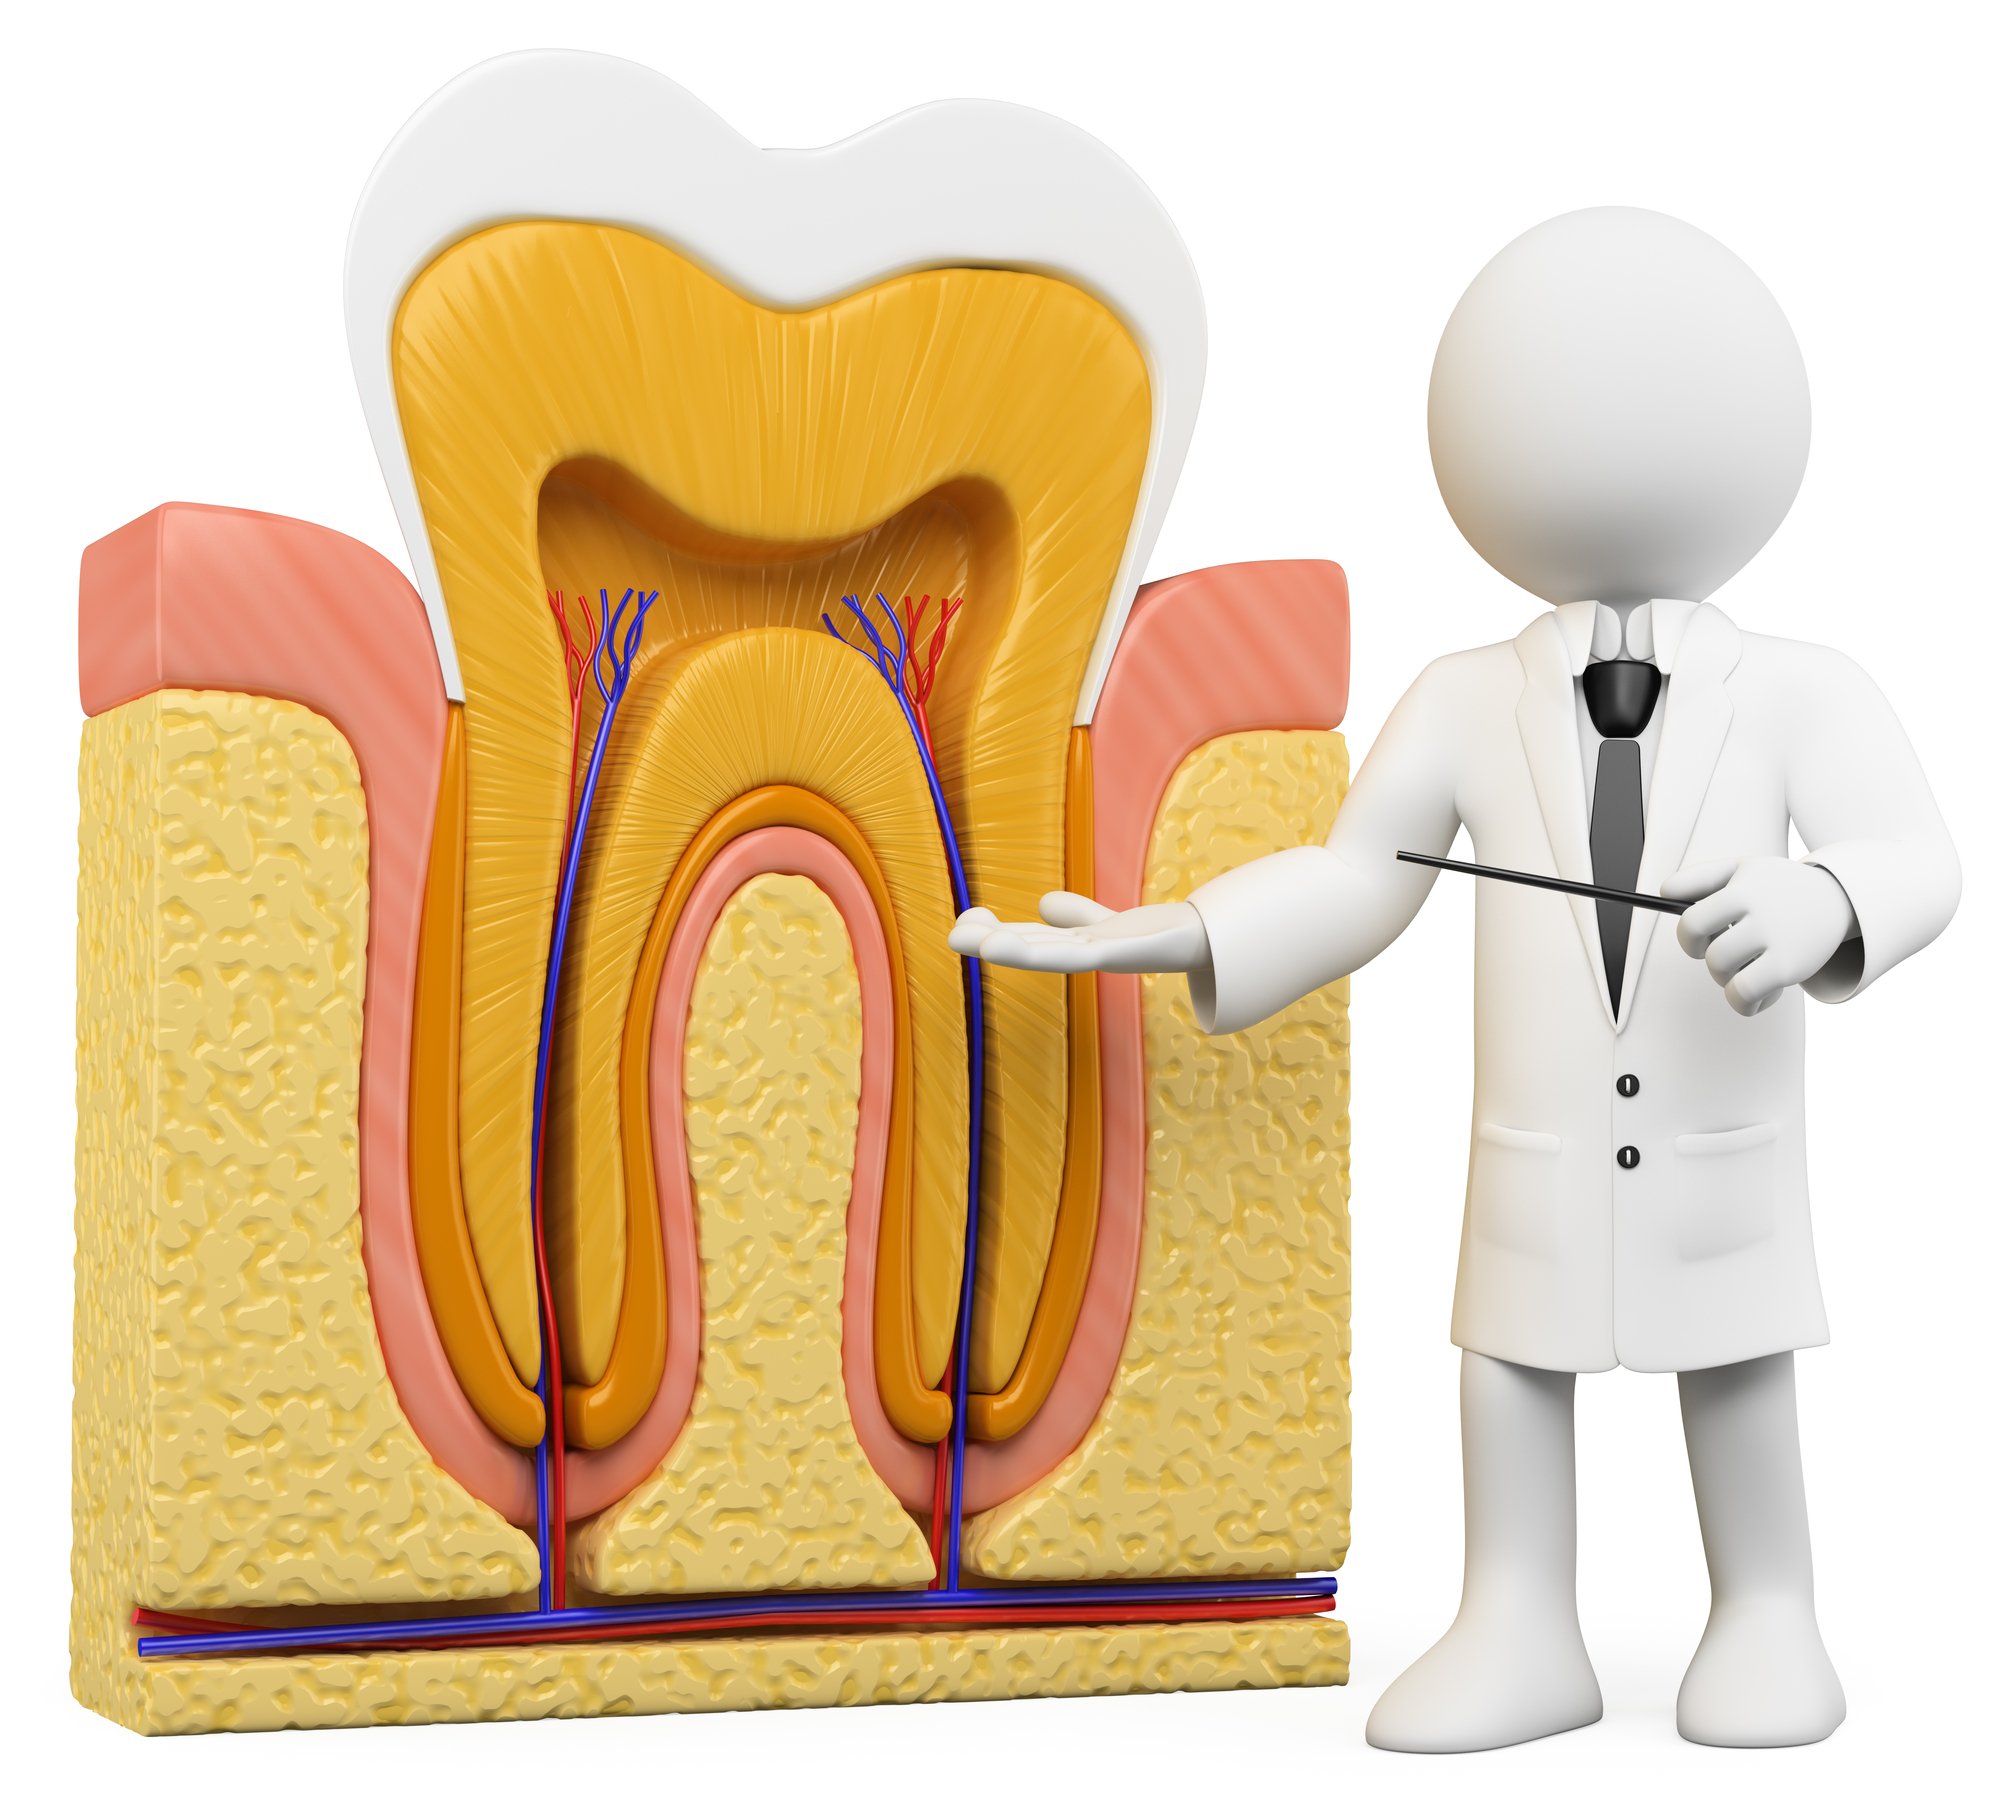 3d white person with a schematic tooth section. 3d image. Isolated white background.